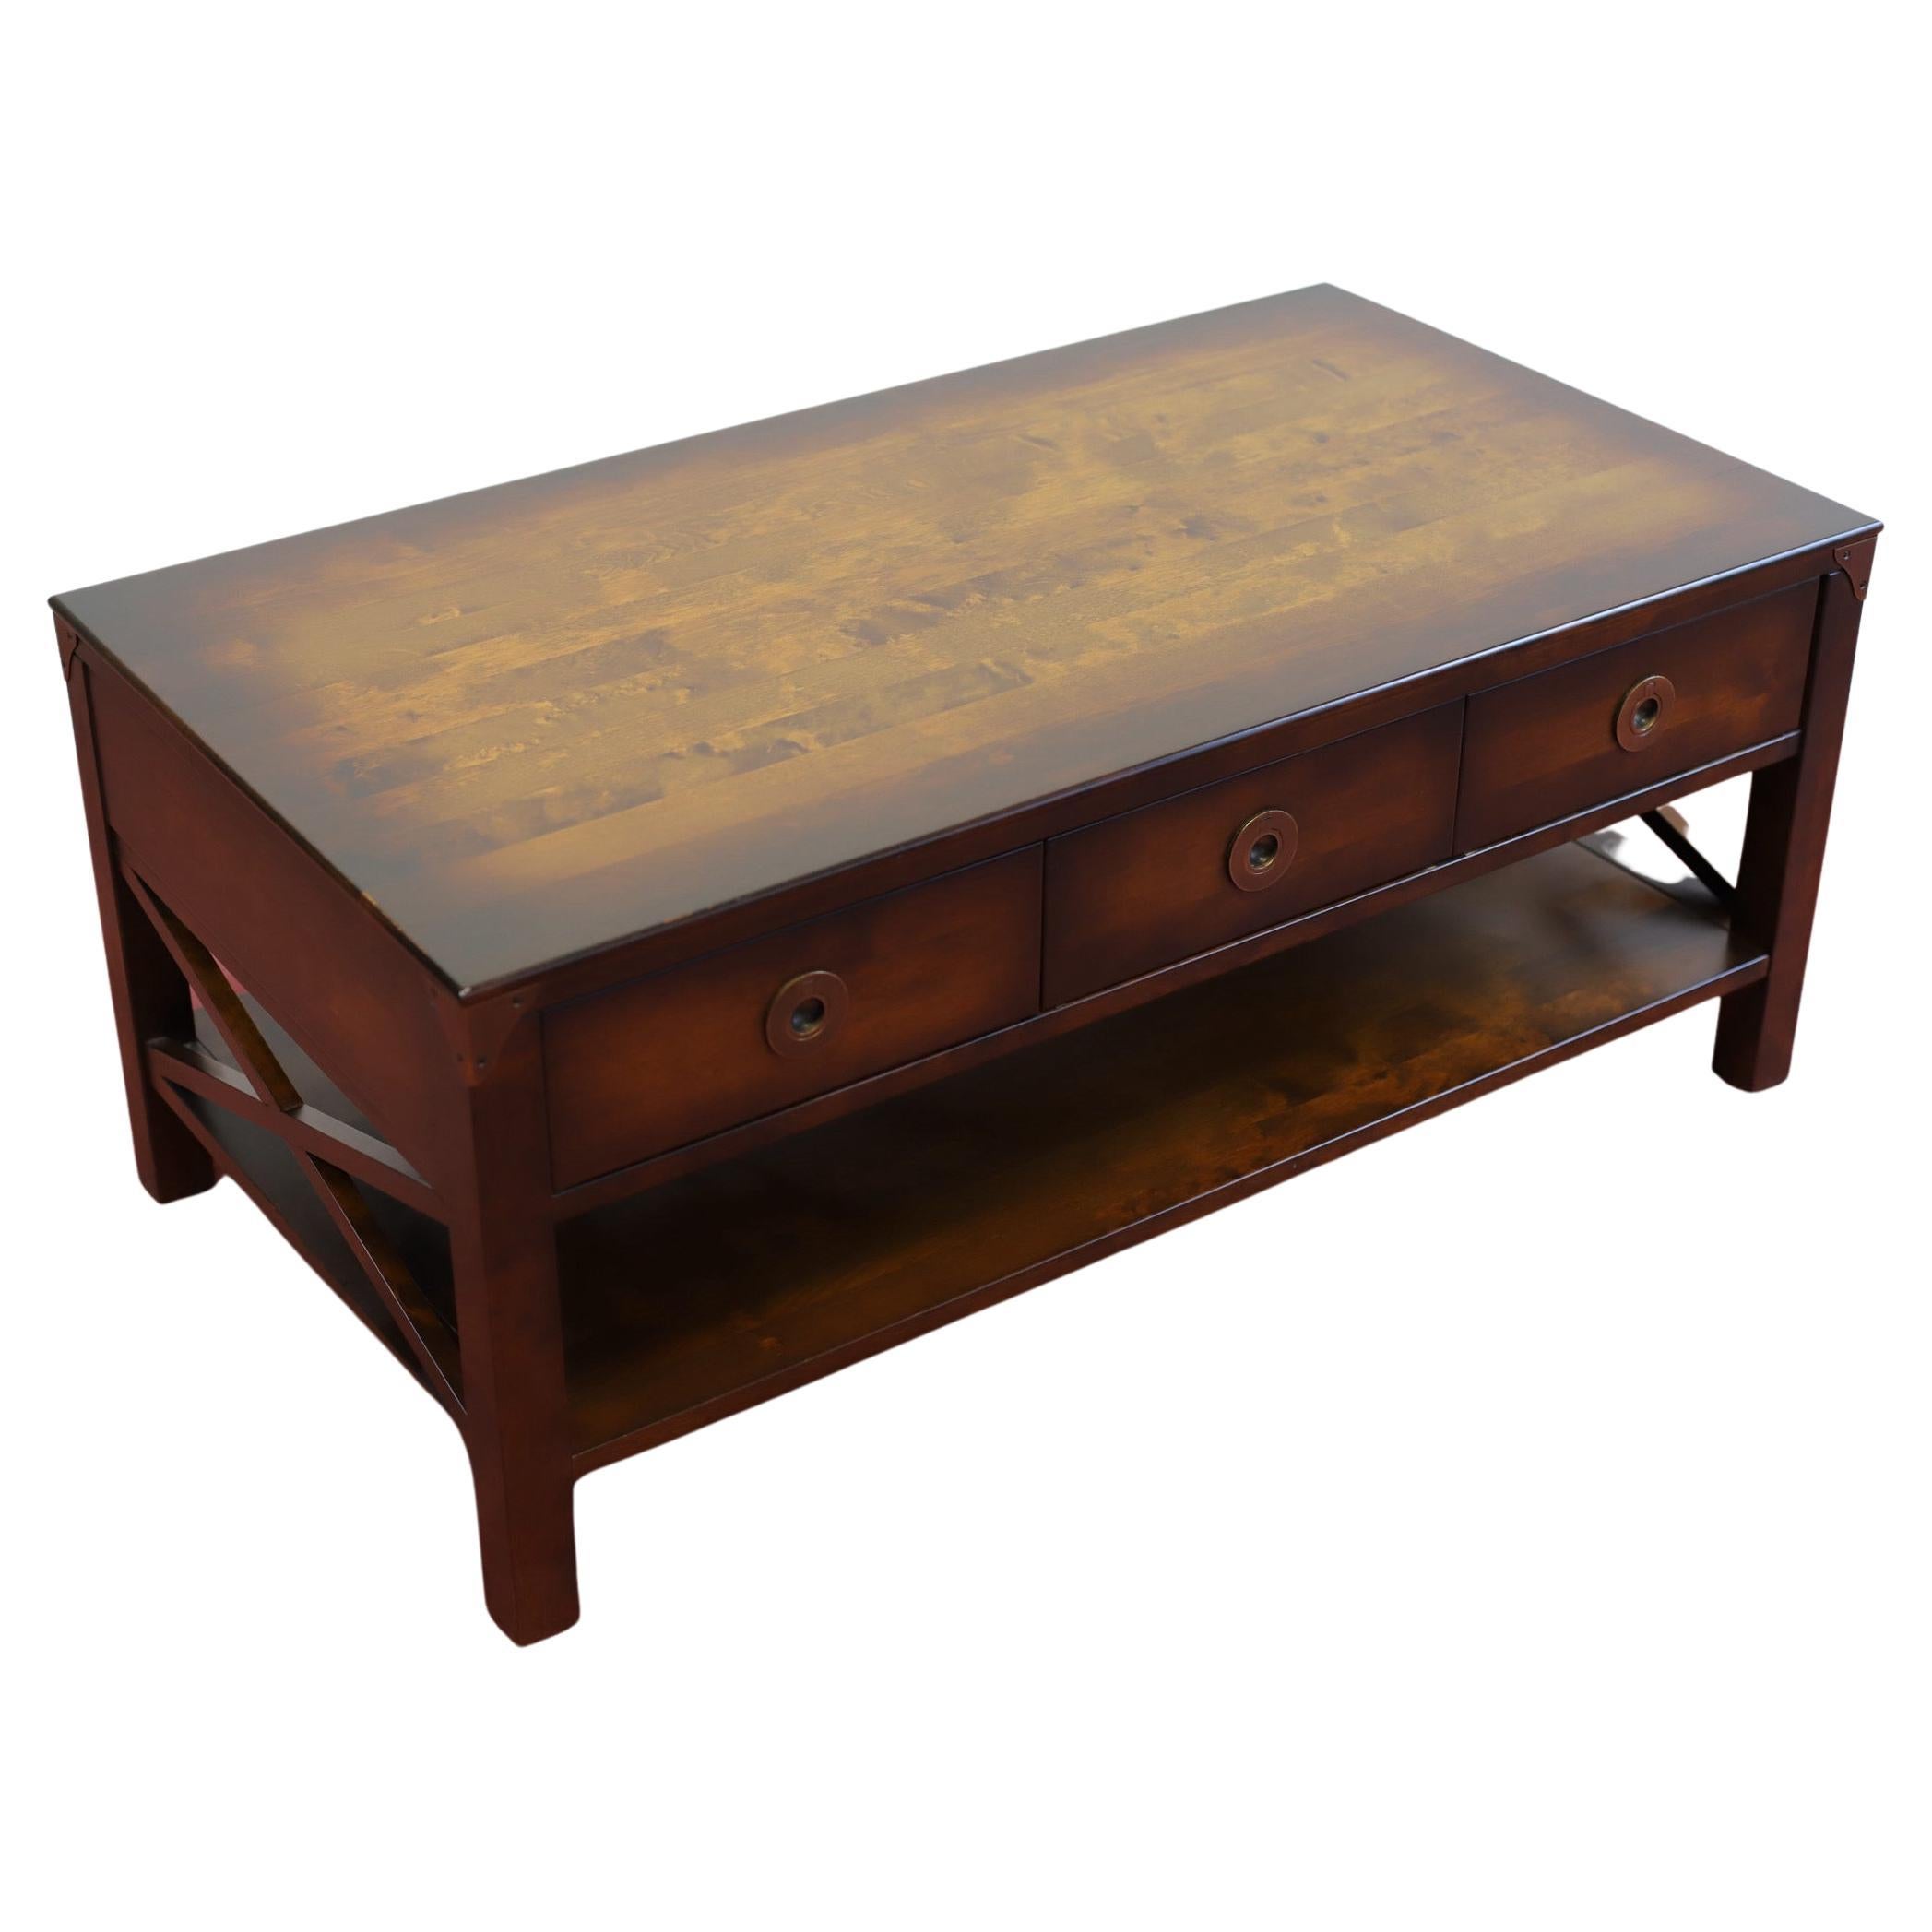 Lovely Laura Ashley Campaign Style Coffee Table 